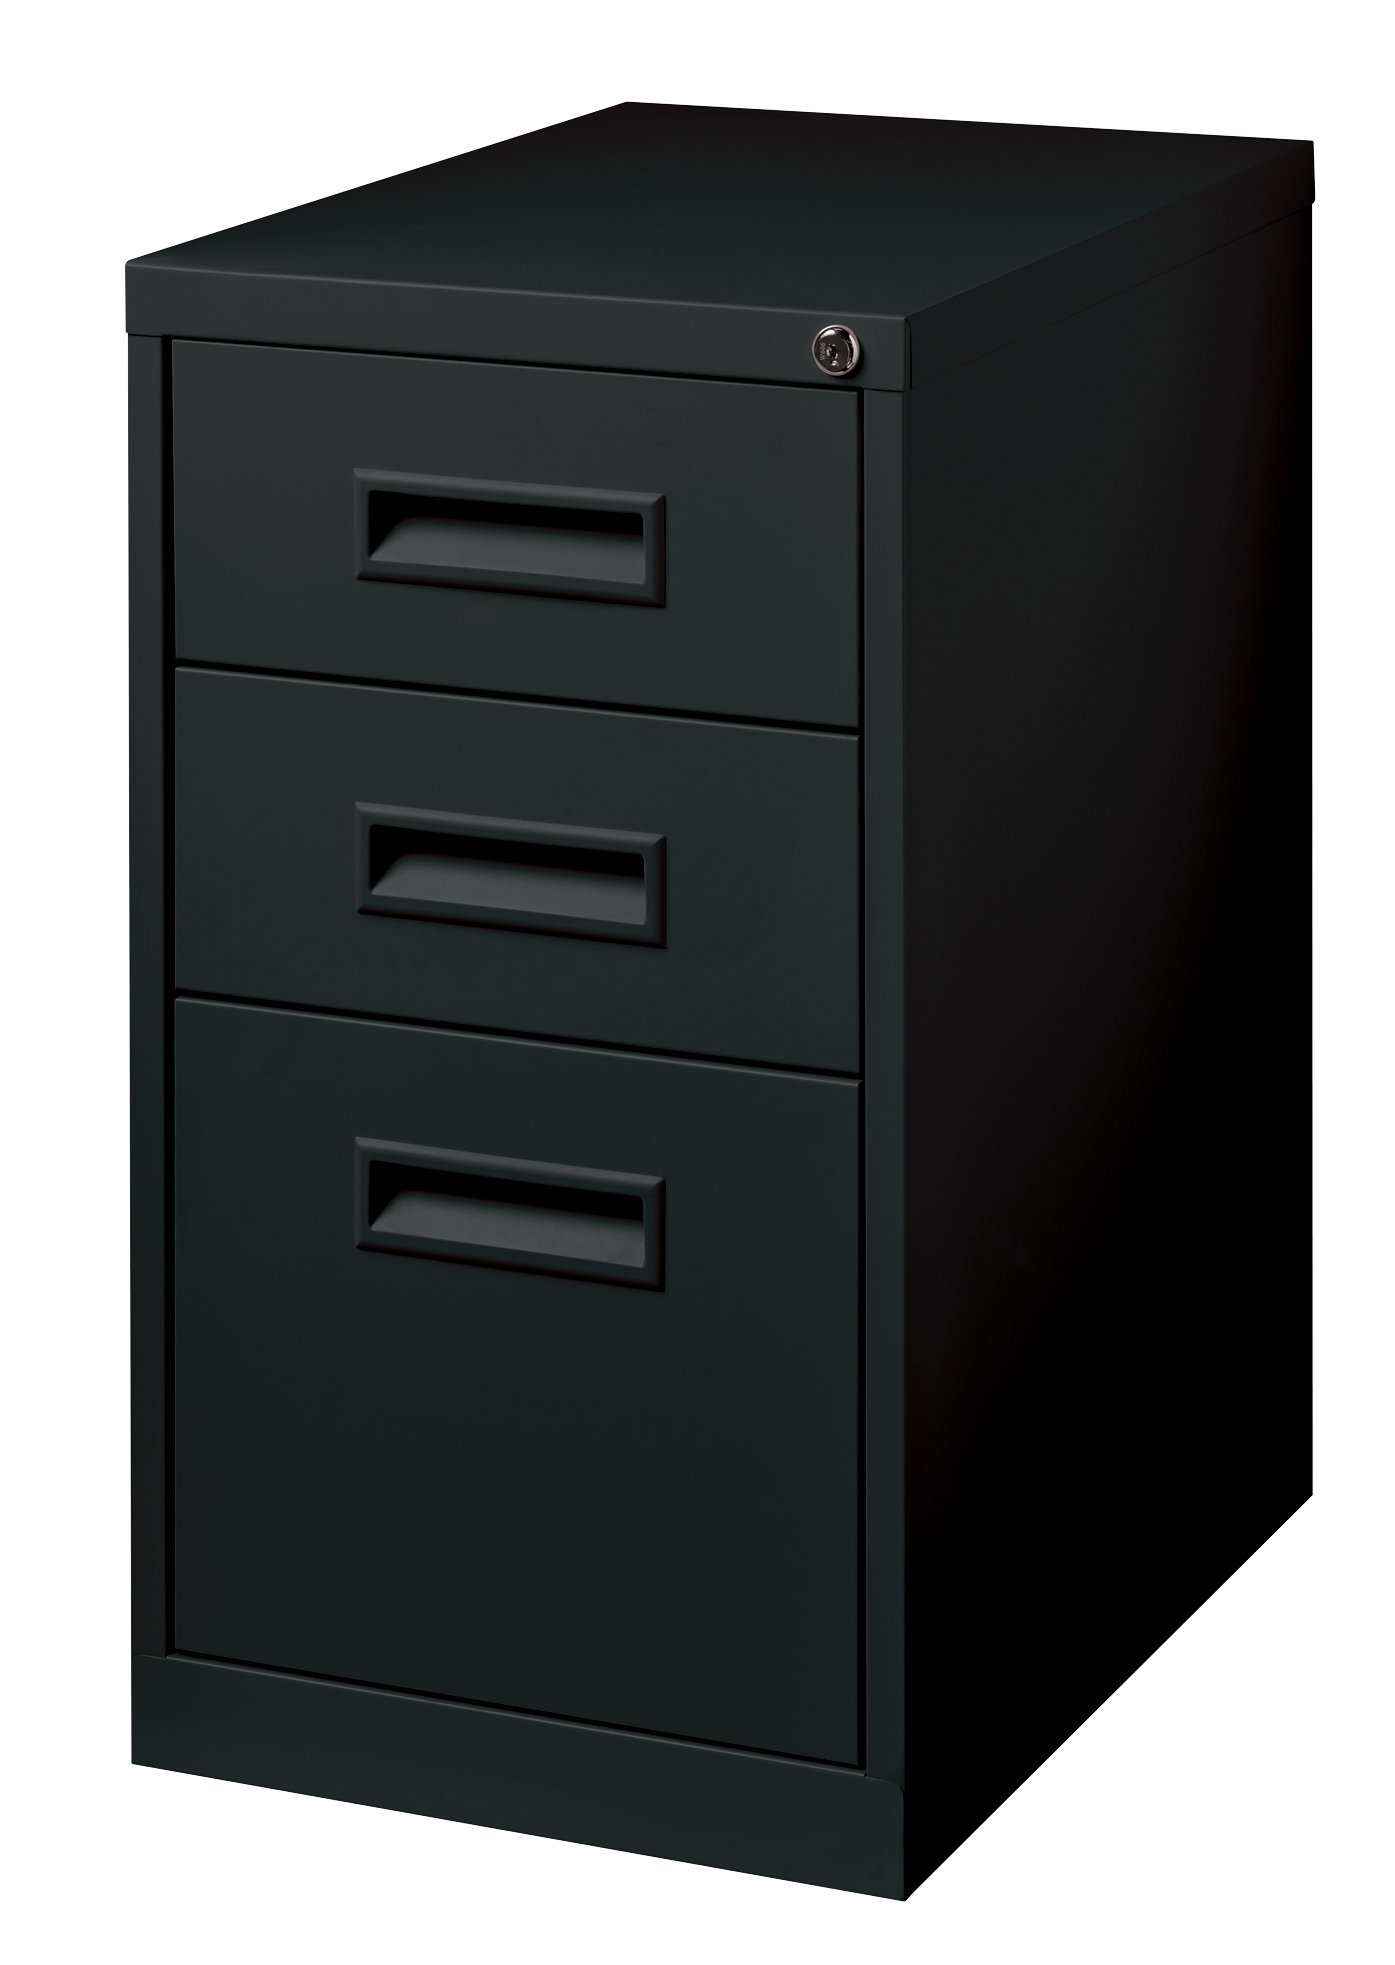 Commclad 3 Drawer Mobile Vertical Filing Cabinet Reviews Wayfair throughout size 1395 X 1965